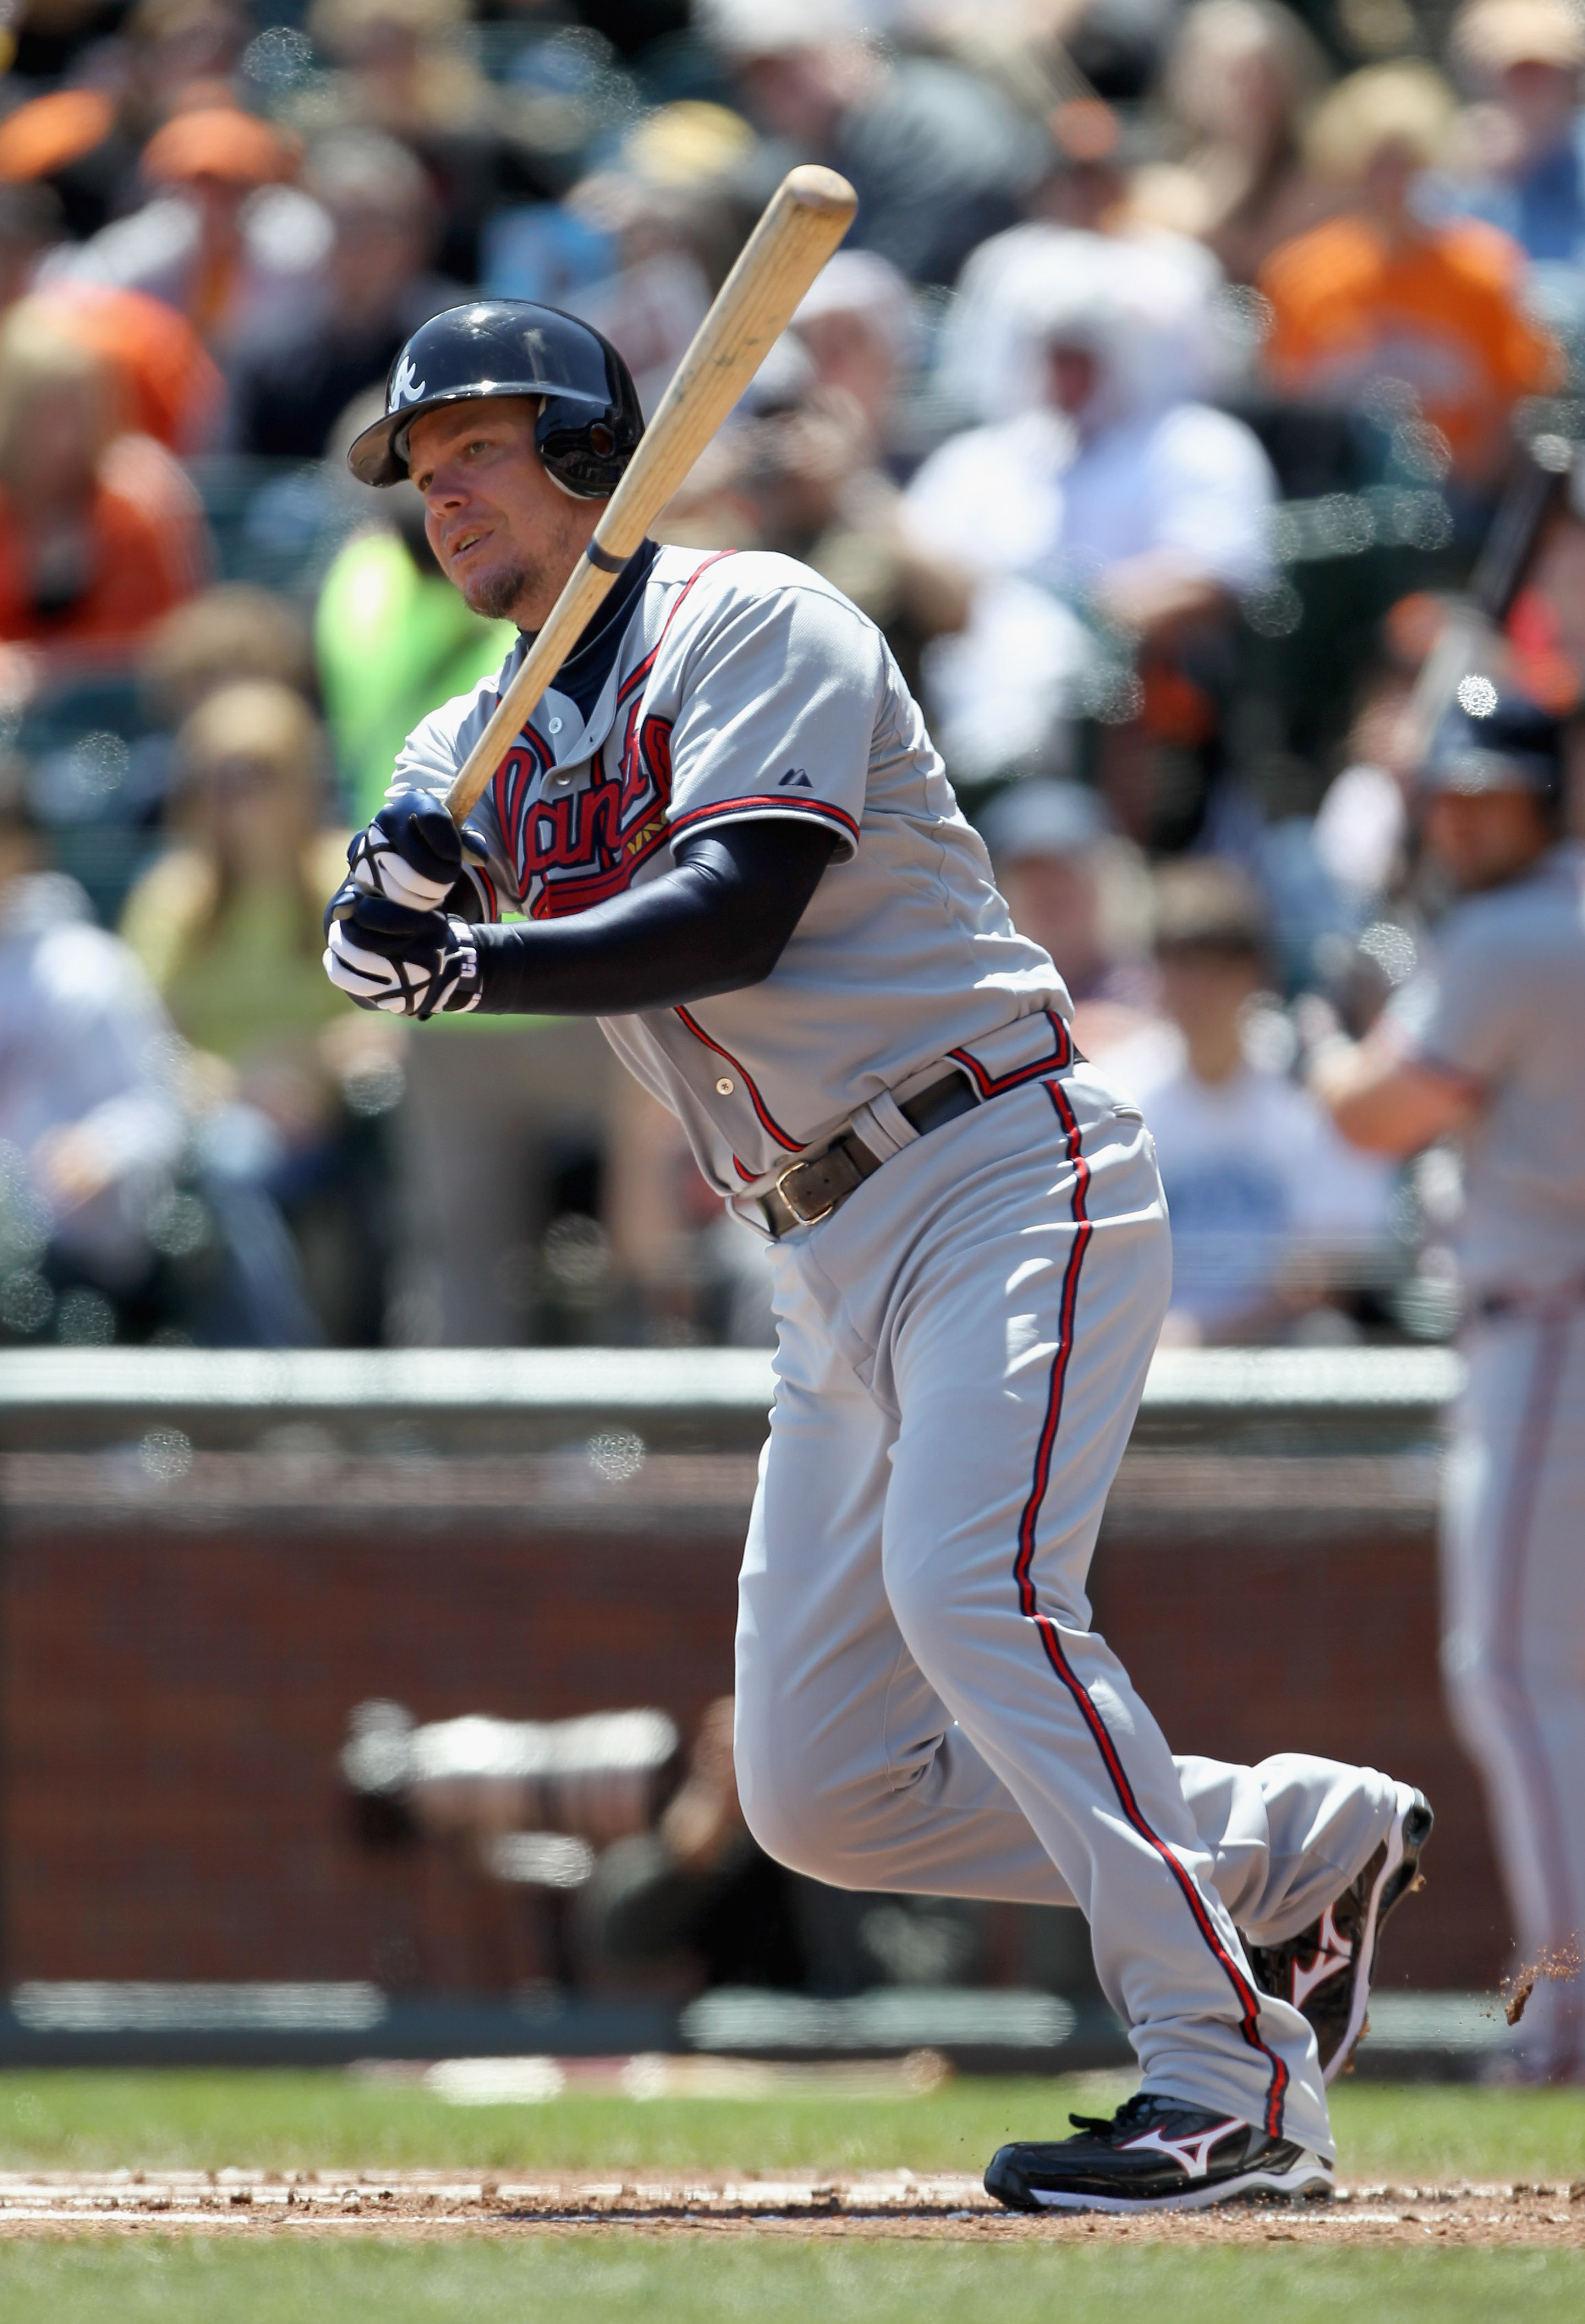 Chipper Jones is leading a very strong Braves team.